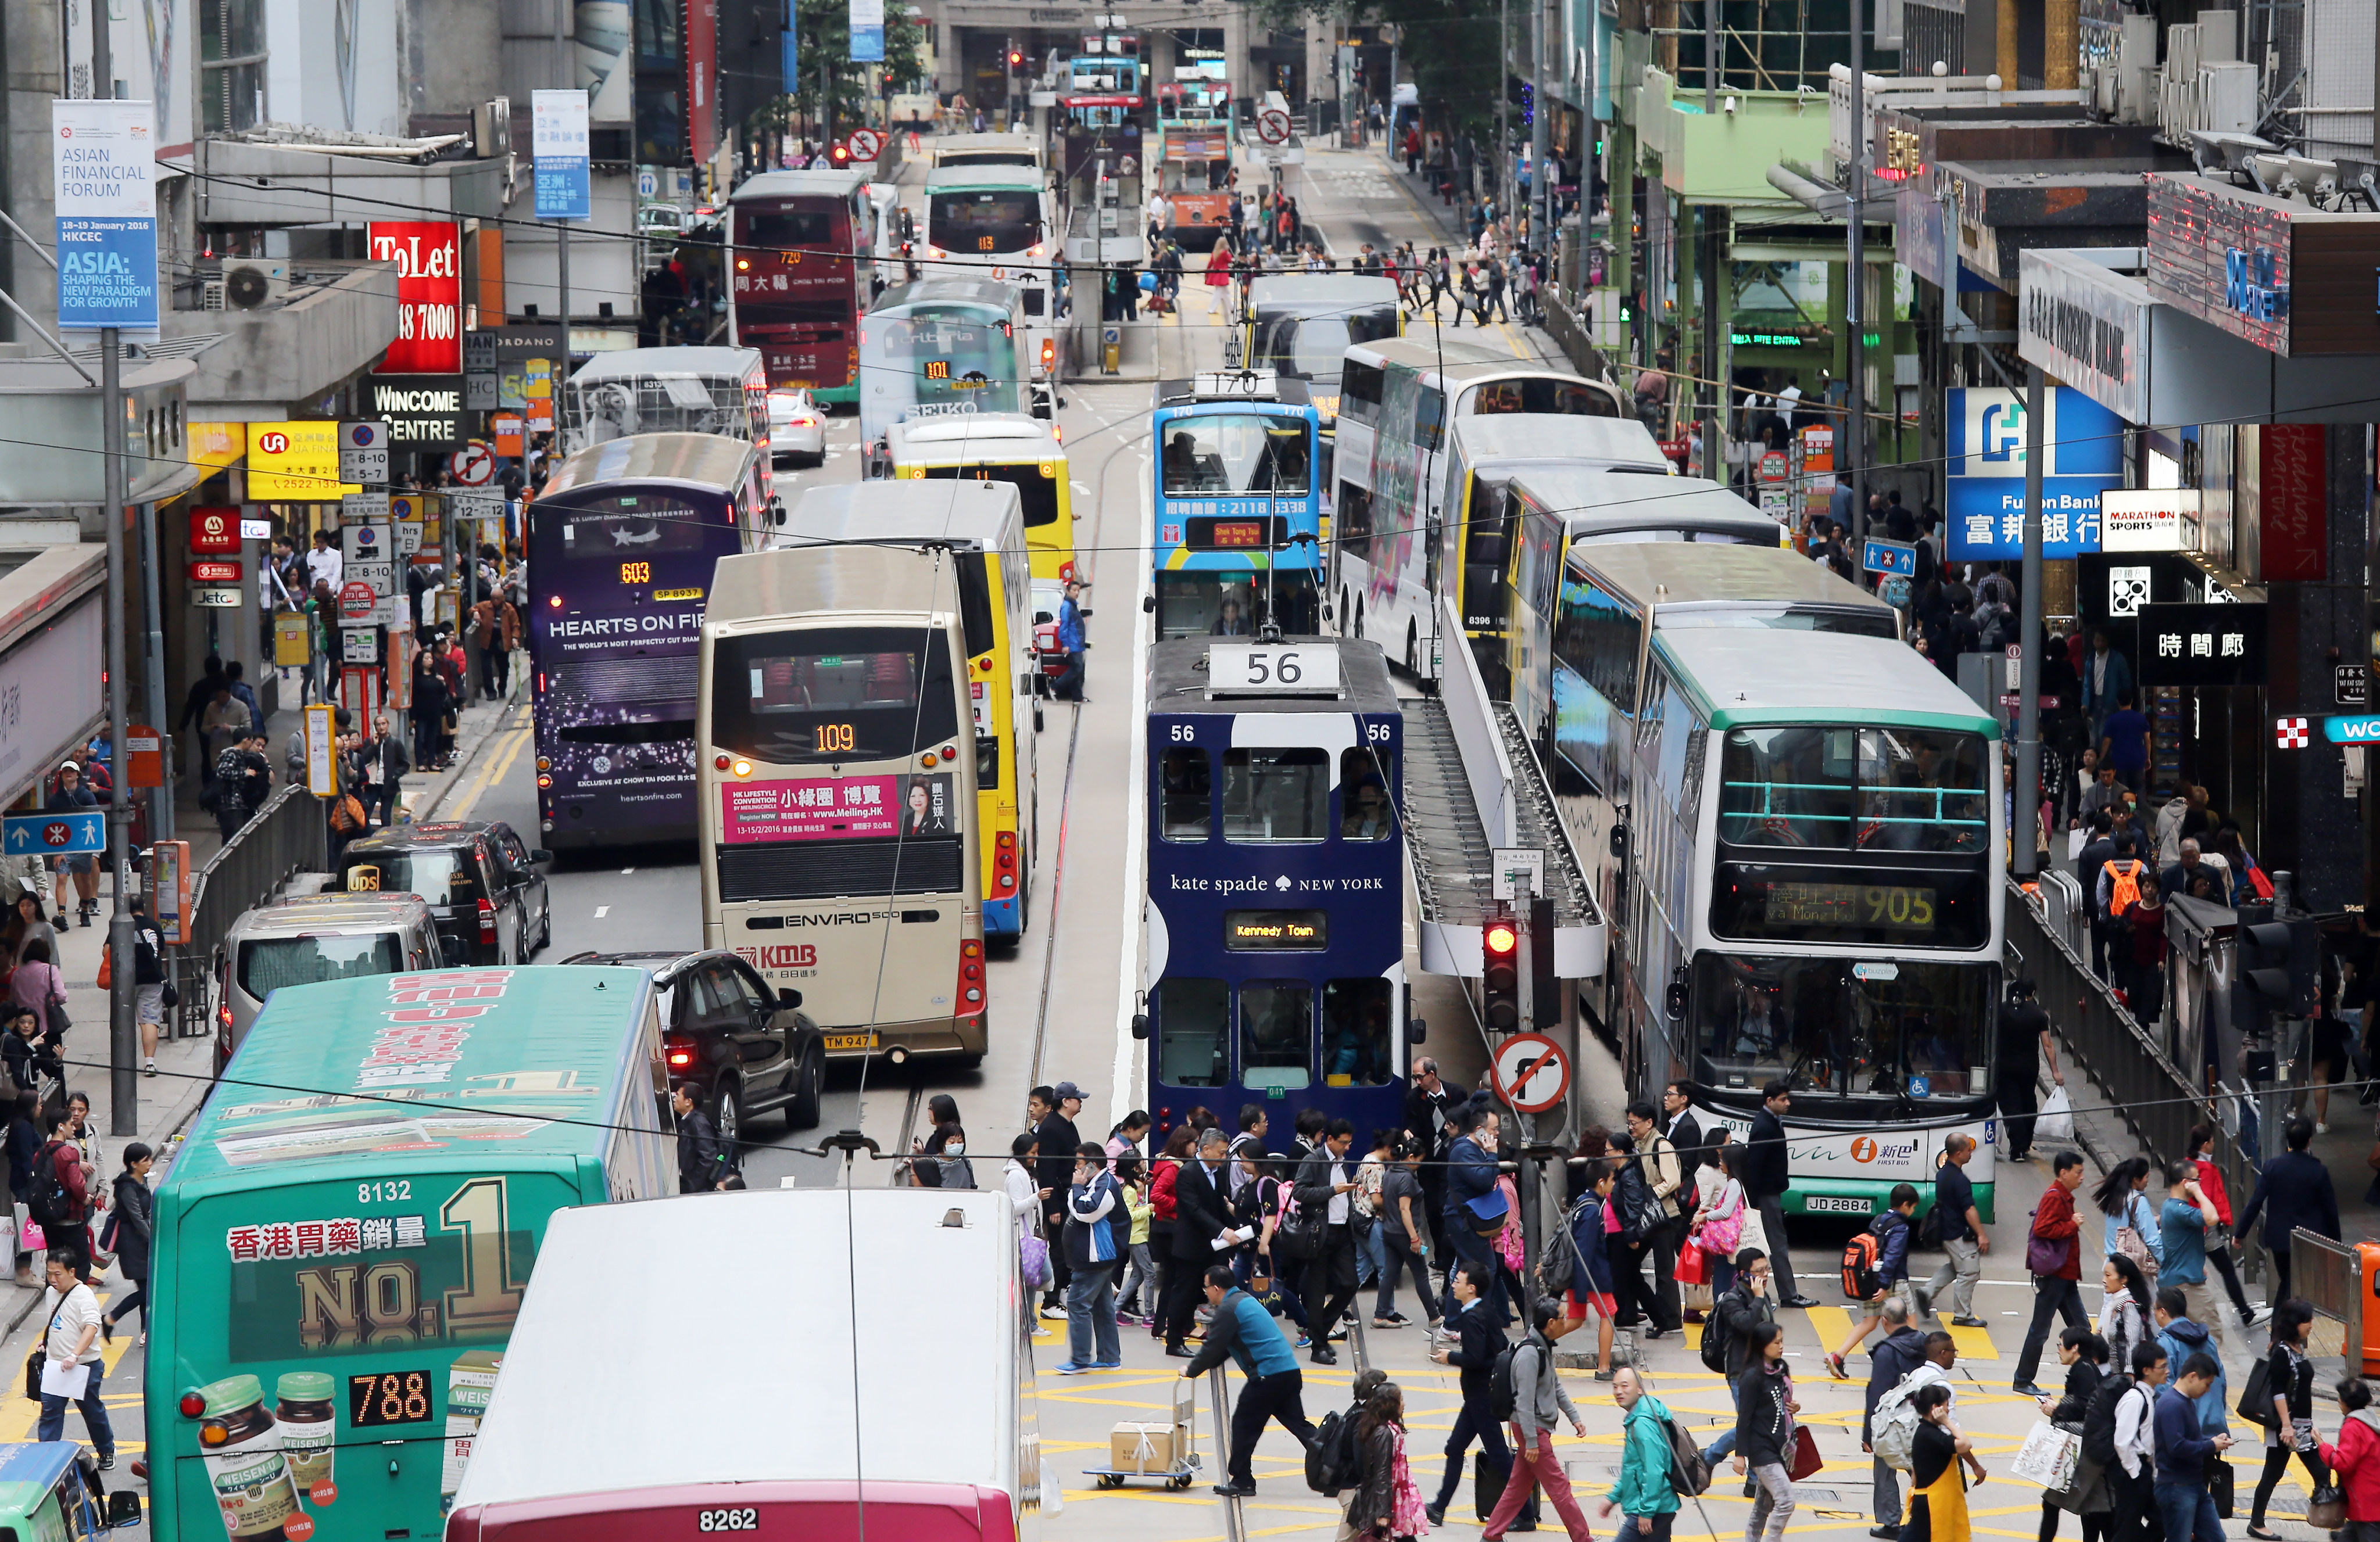 Hong Kong’s public transport system is known for the speed and efficiency of its services and was ranked No 1 in the world in a 2022 survey of 60 global cities. Photo: Dickson Lee/SCMP